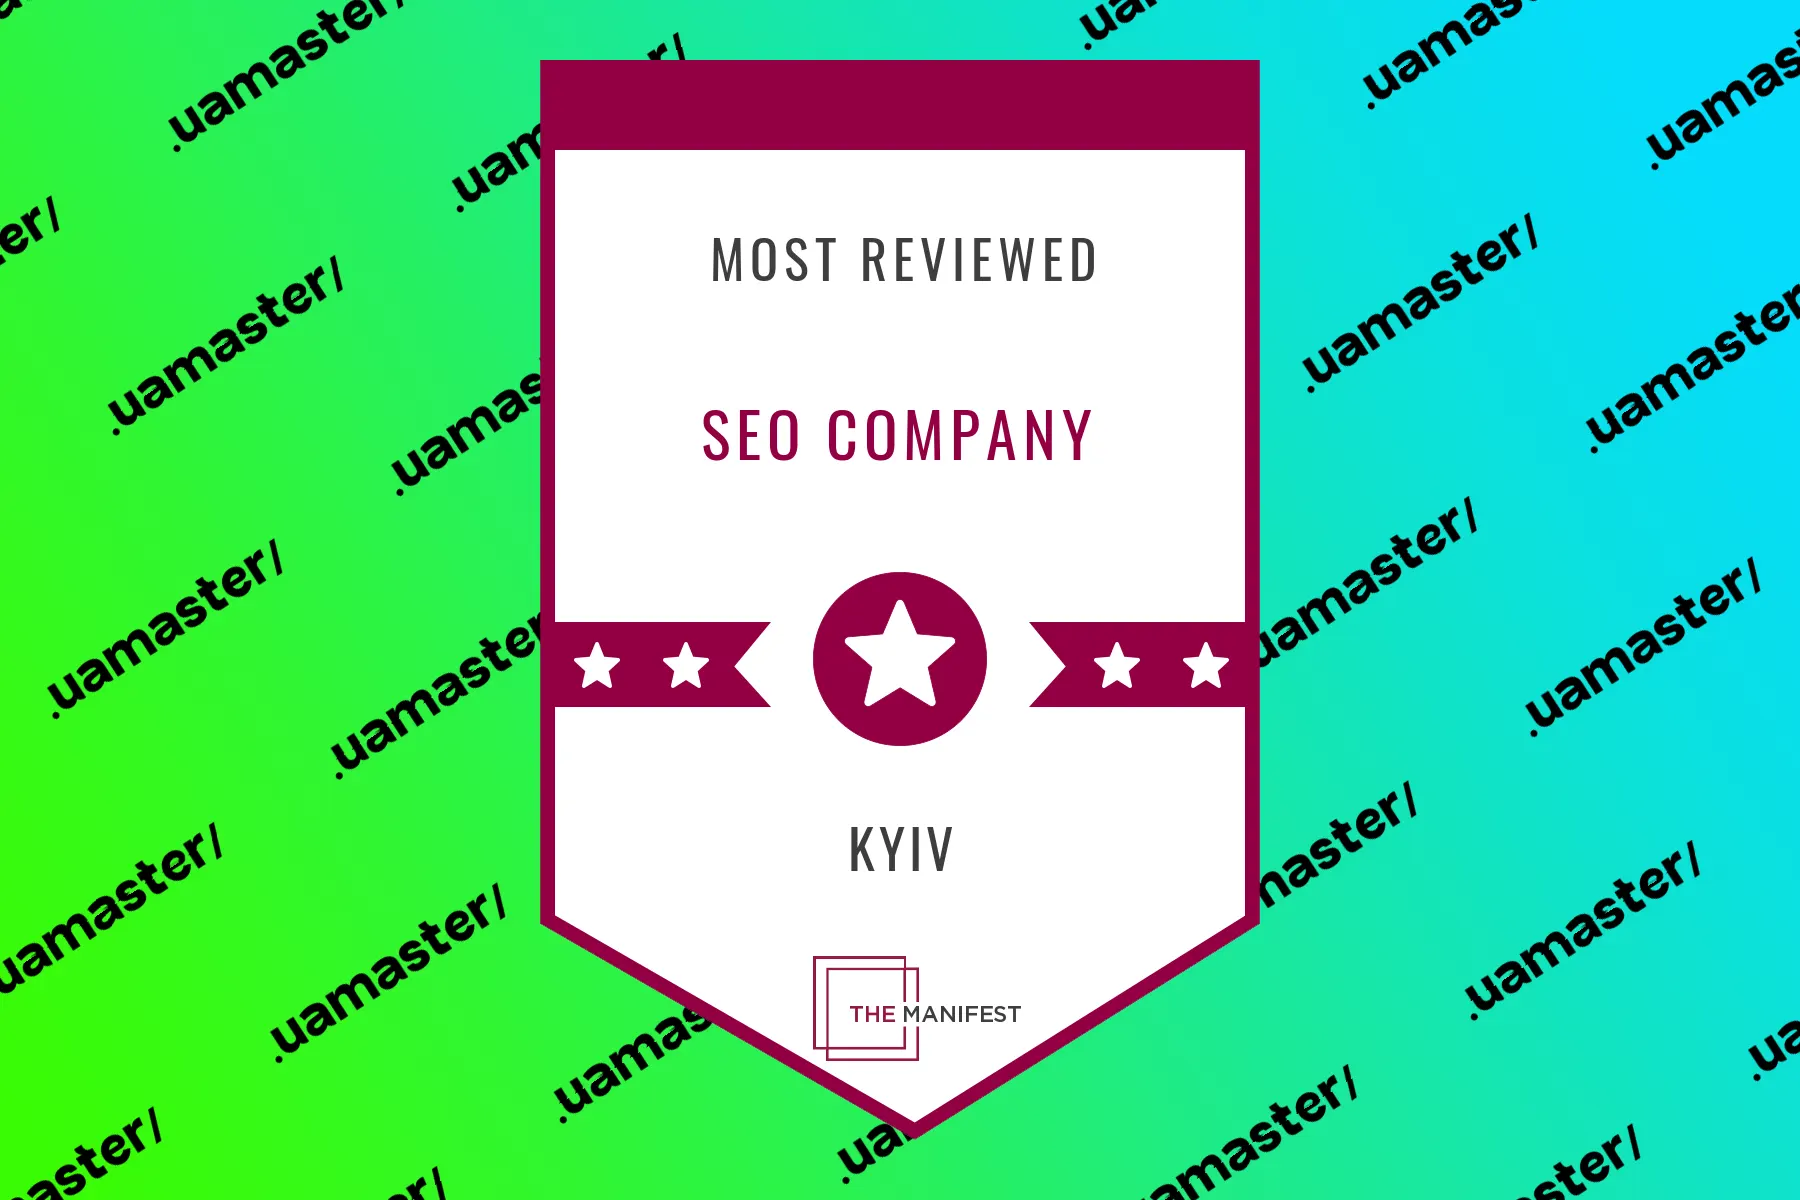 The Manifest Crowns UAMASTER as one of the Most Reviewed SEO Agencies in Kyiv